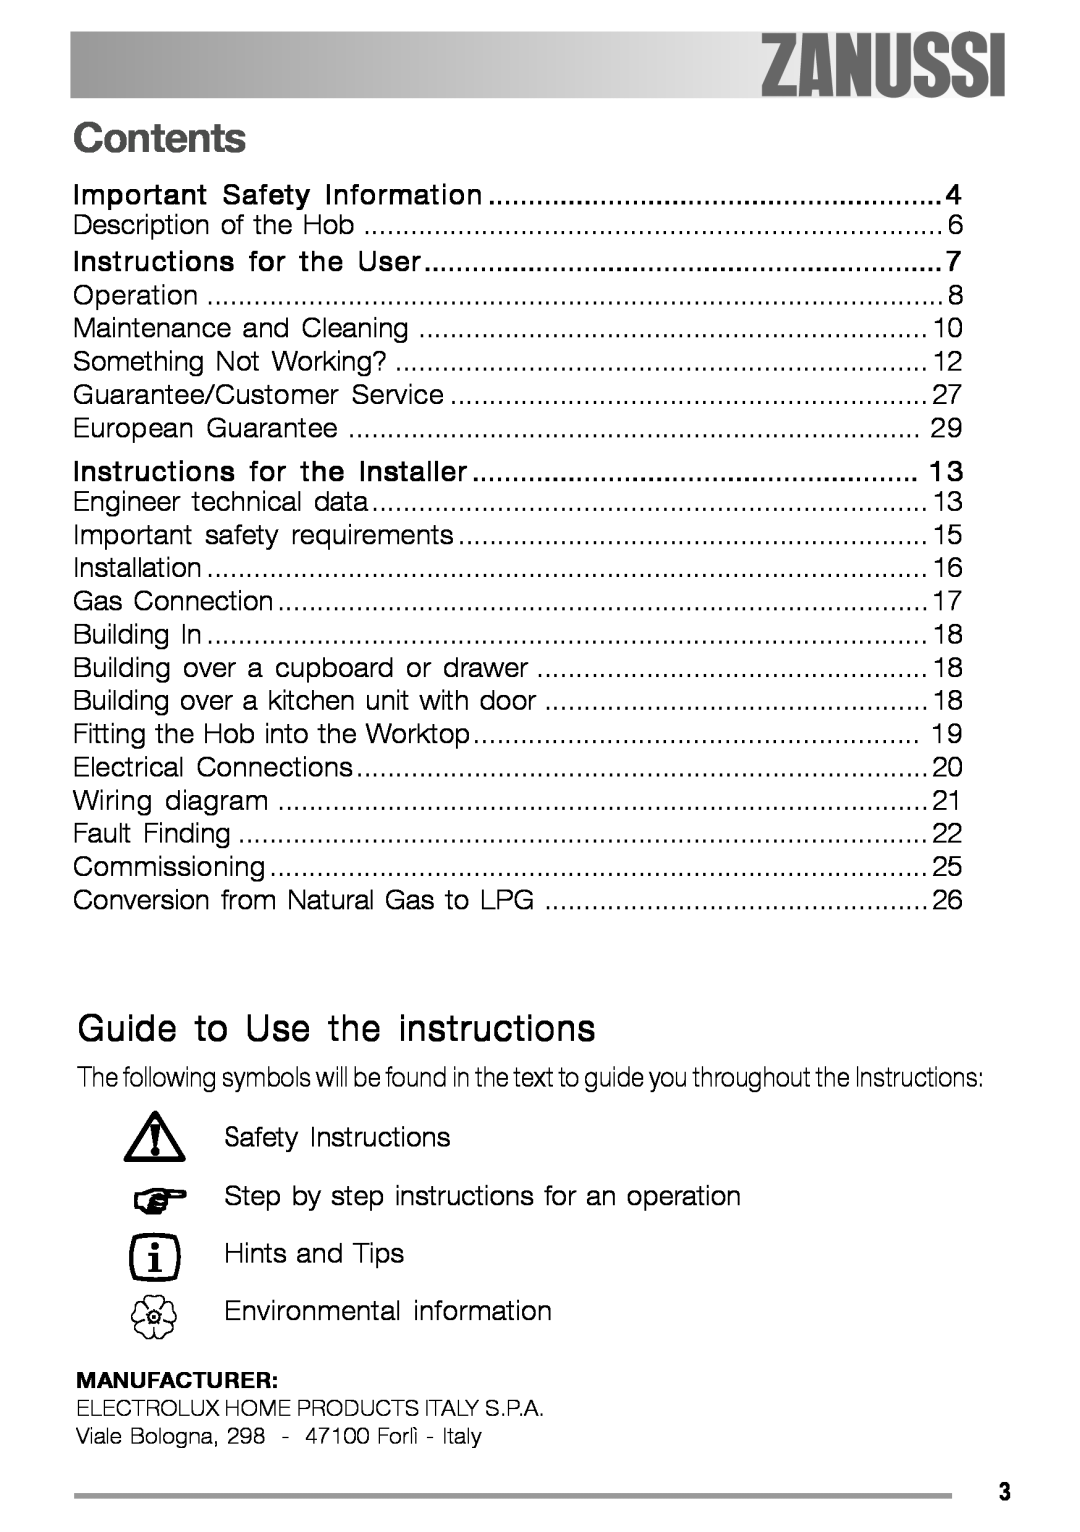 Zanussi ZGS 322 manual Contents, Guide to Use the instructions 